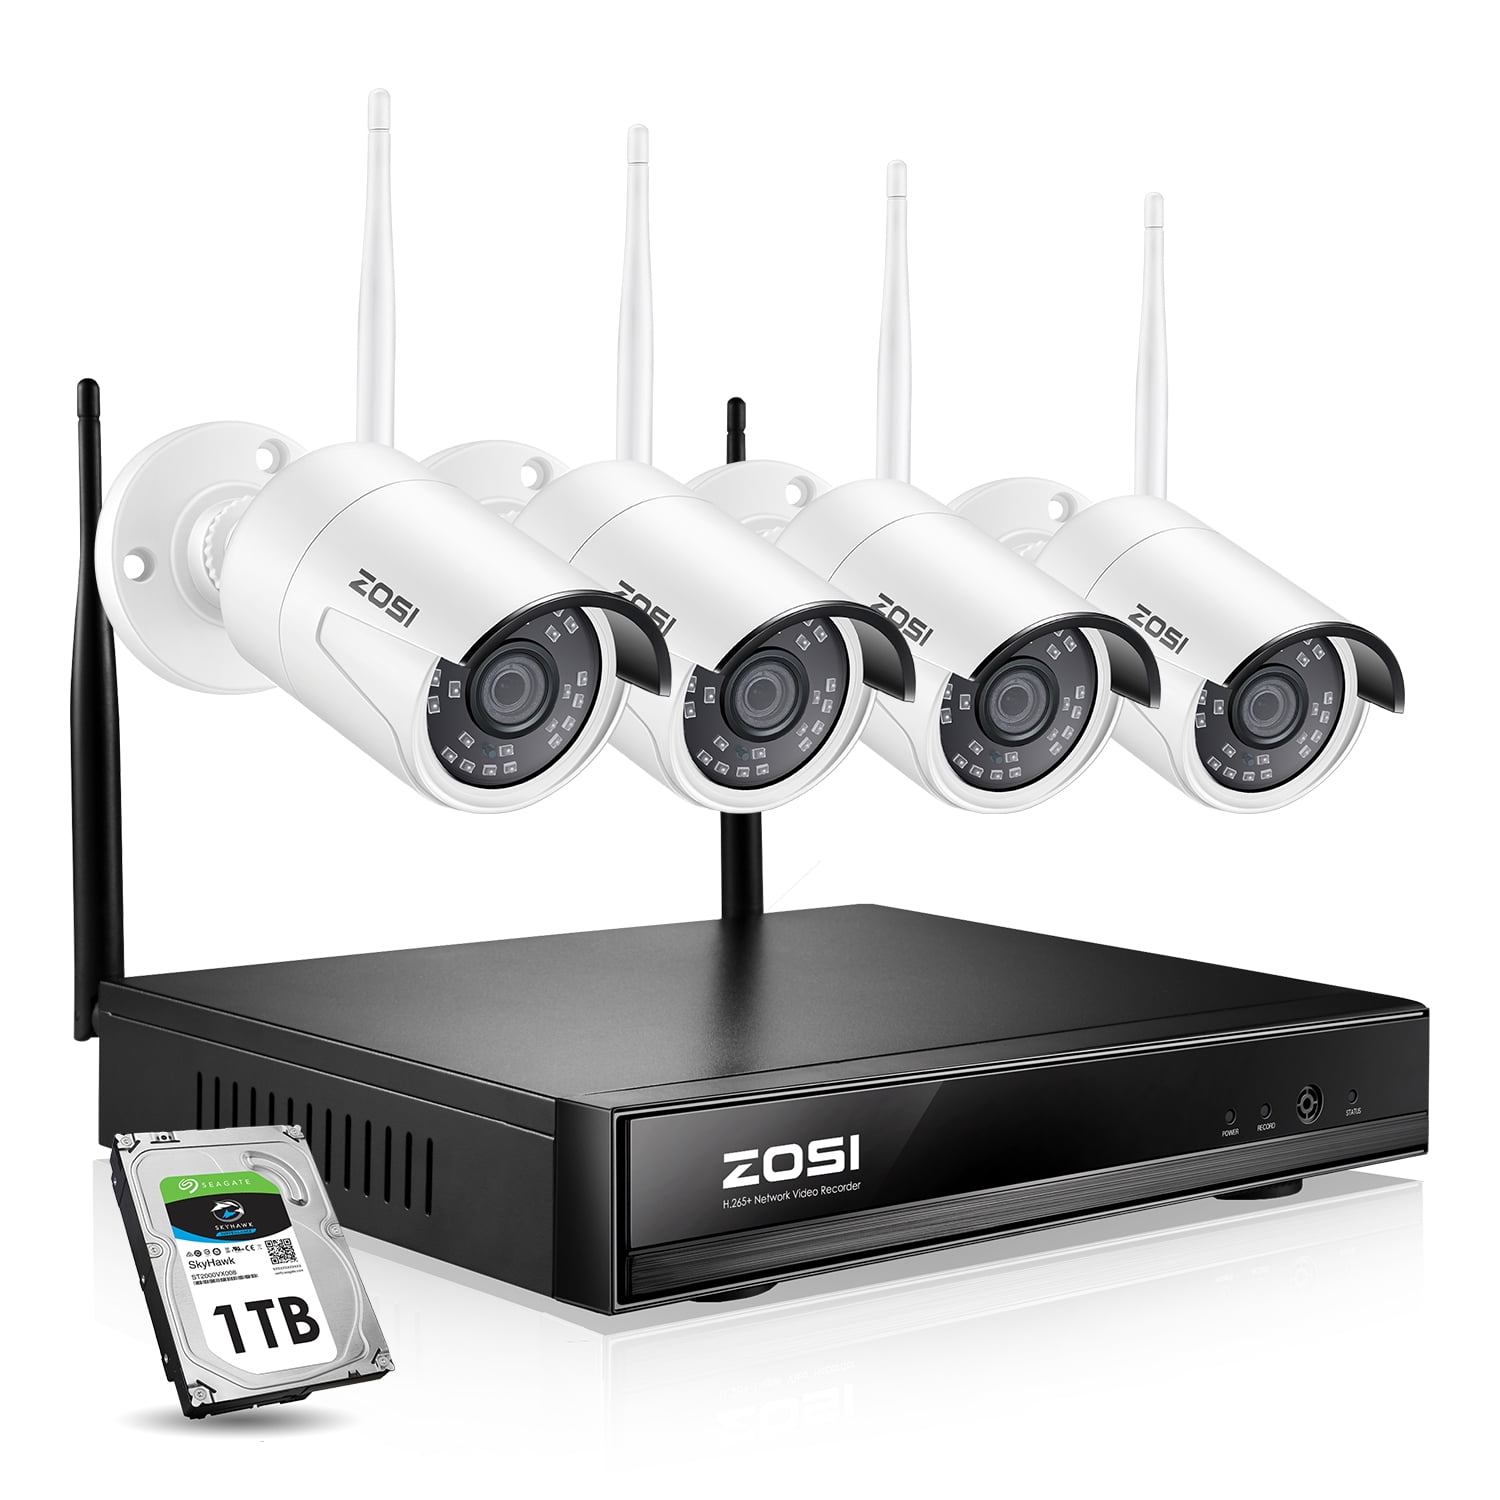 ZOSI H.265+ Wireless Security Camera System 8CH 1080P 1TB NVR and 4PCS 2.0MP Bullet Weatherproof